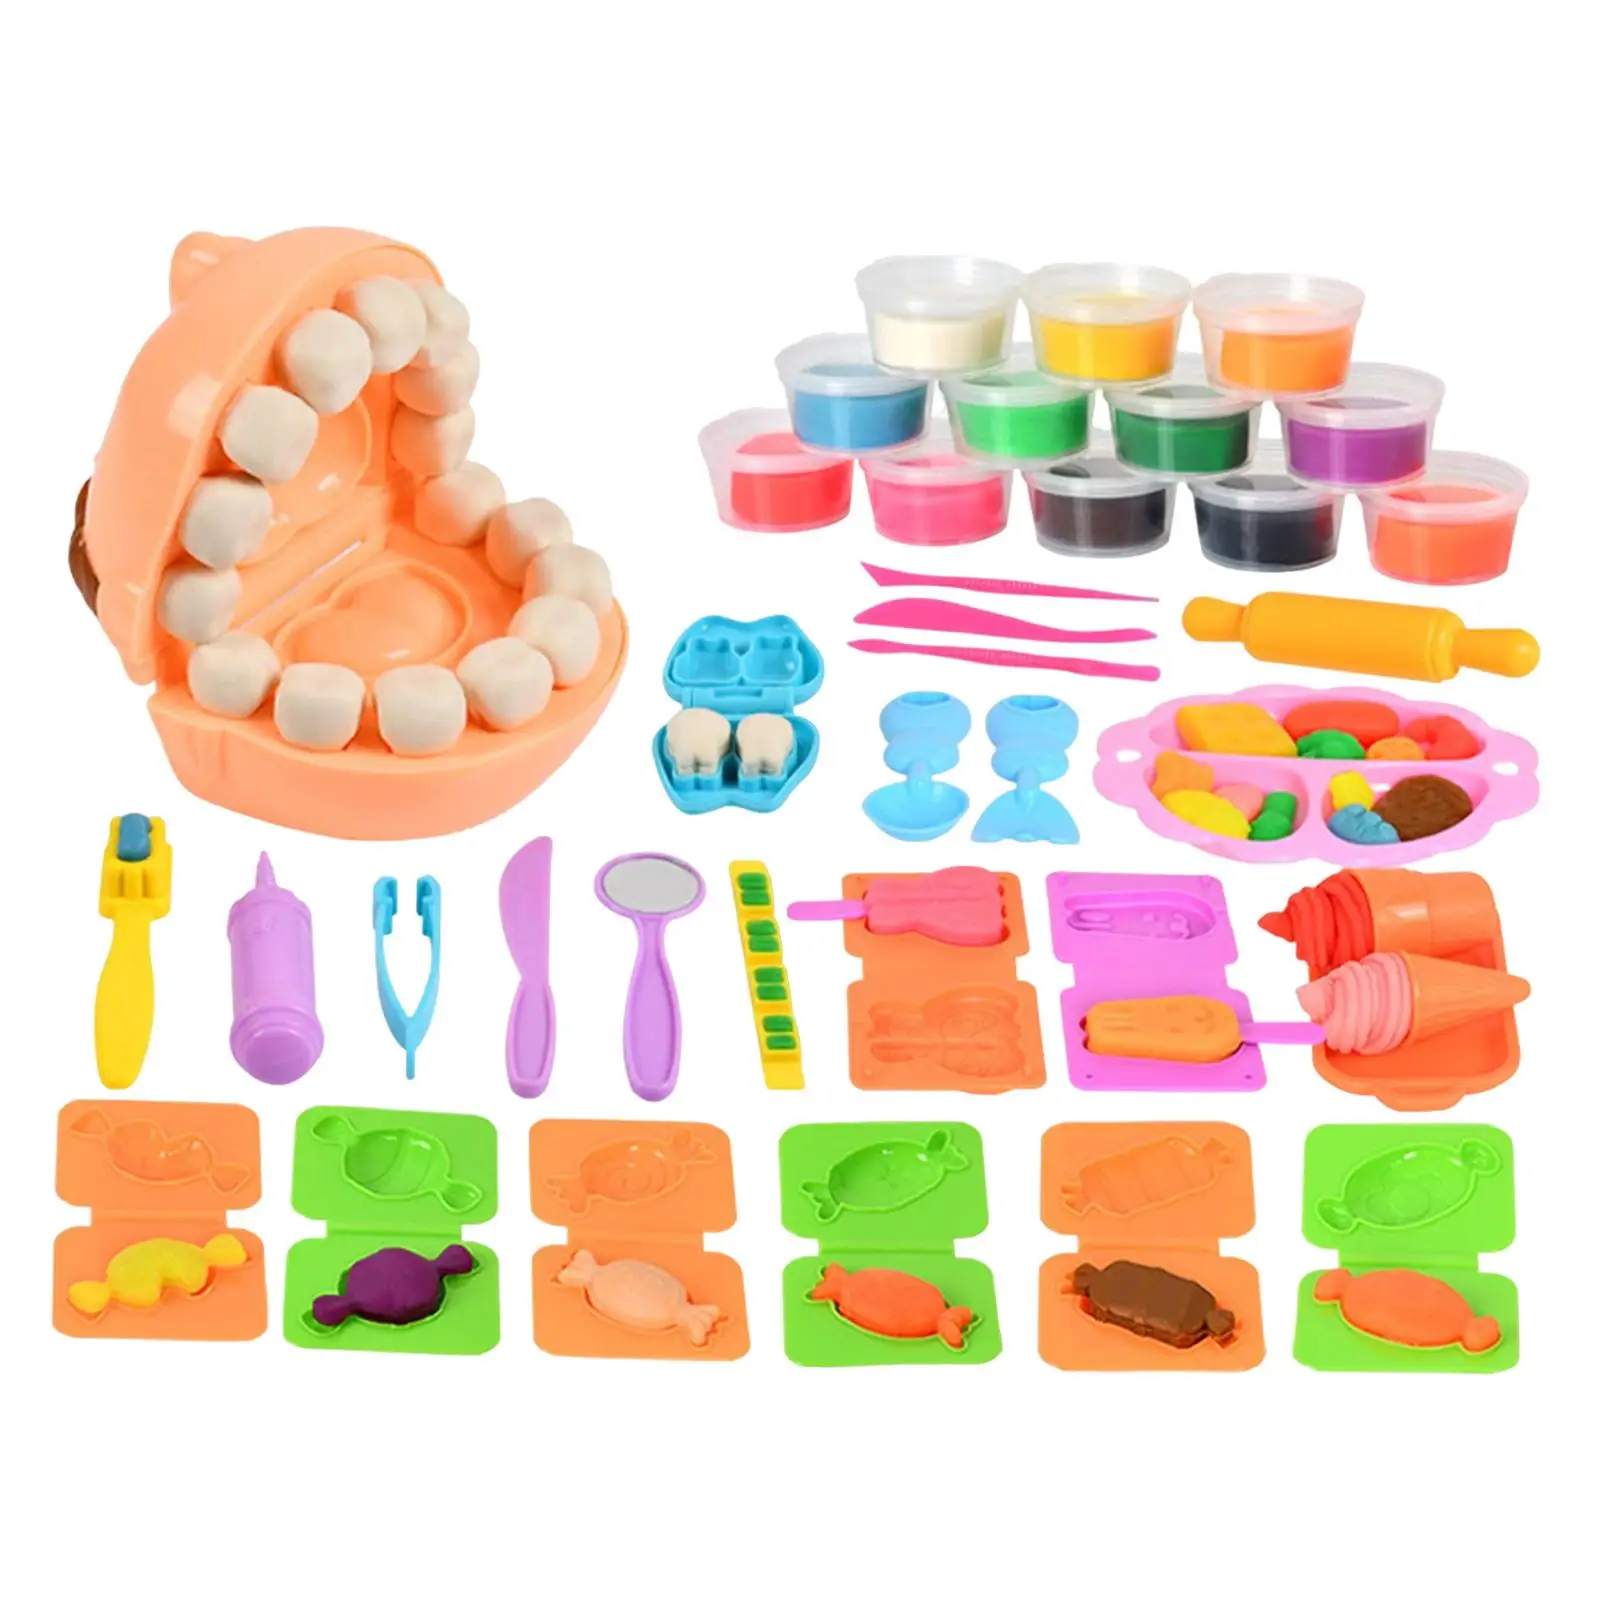 Modeling Clay Set 12 Colors Educational Pretend Play DIY Models Art Crafts with Accessoires for Girl Toddlers Boys Birthday Kids